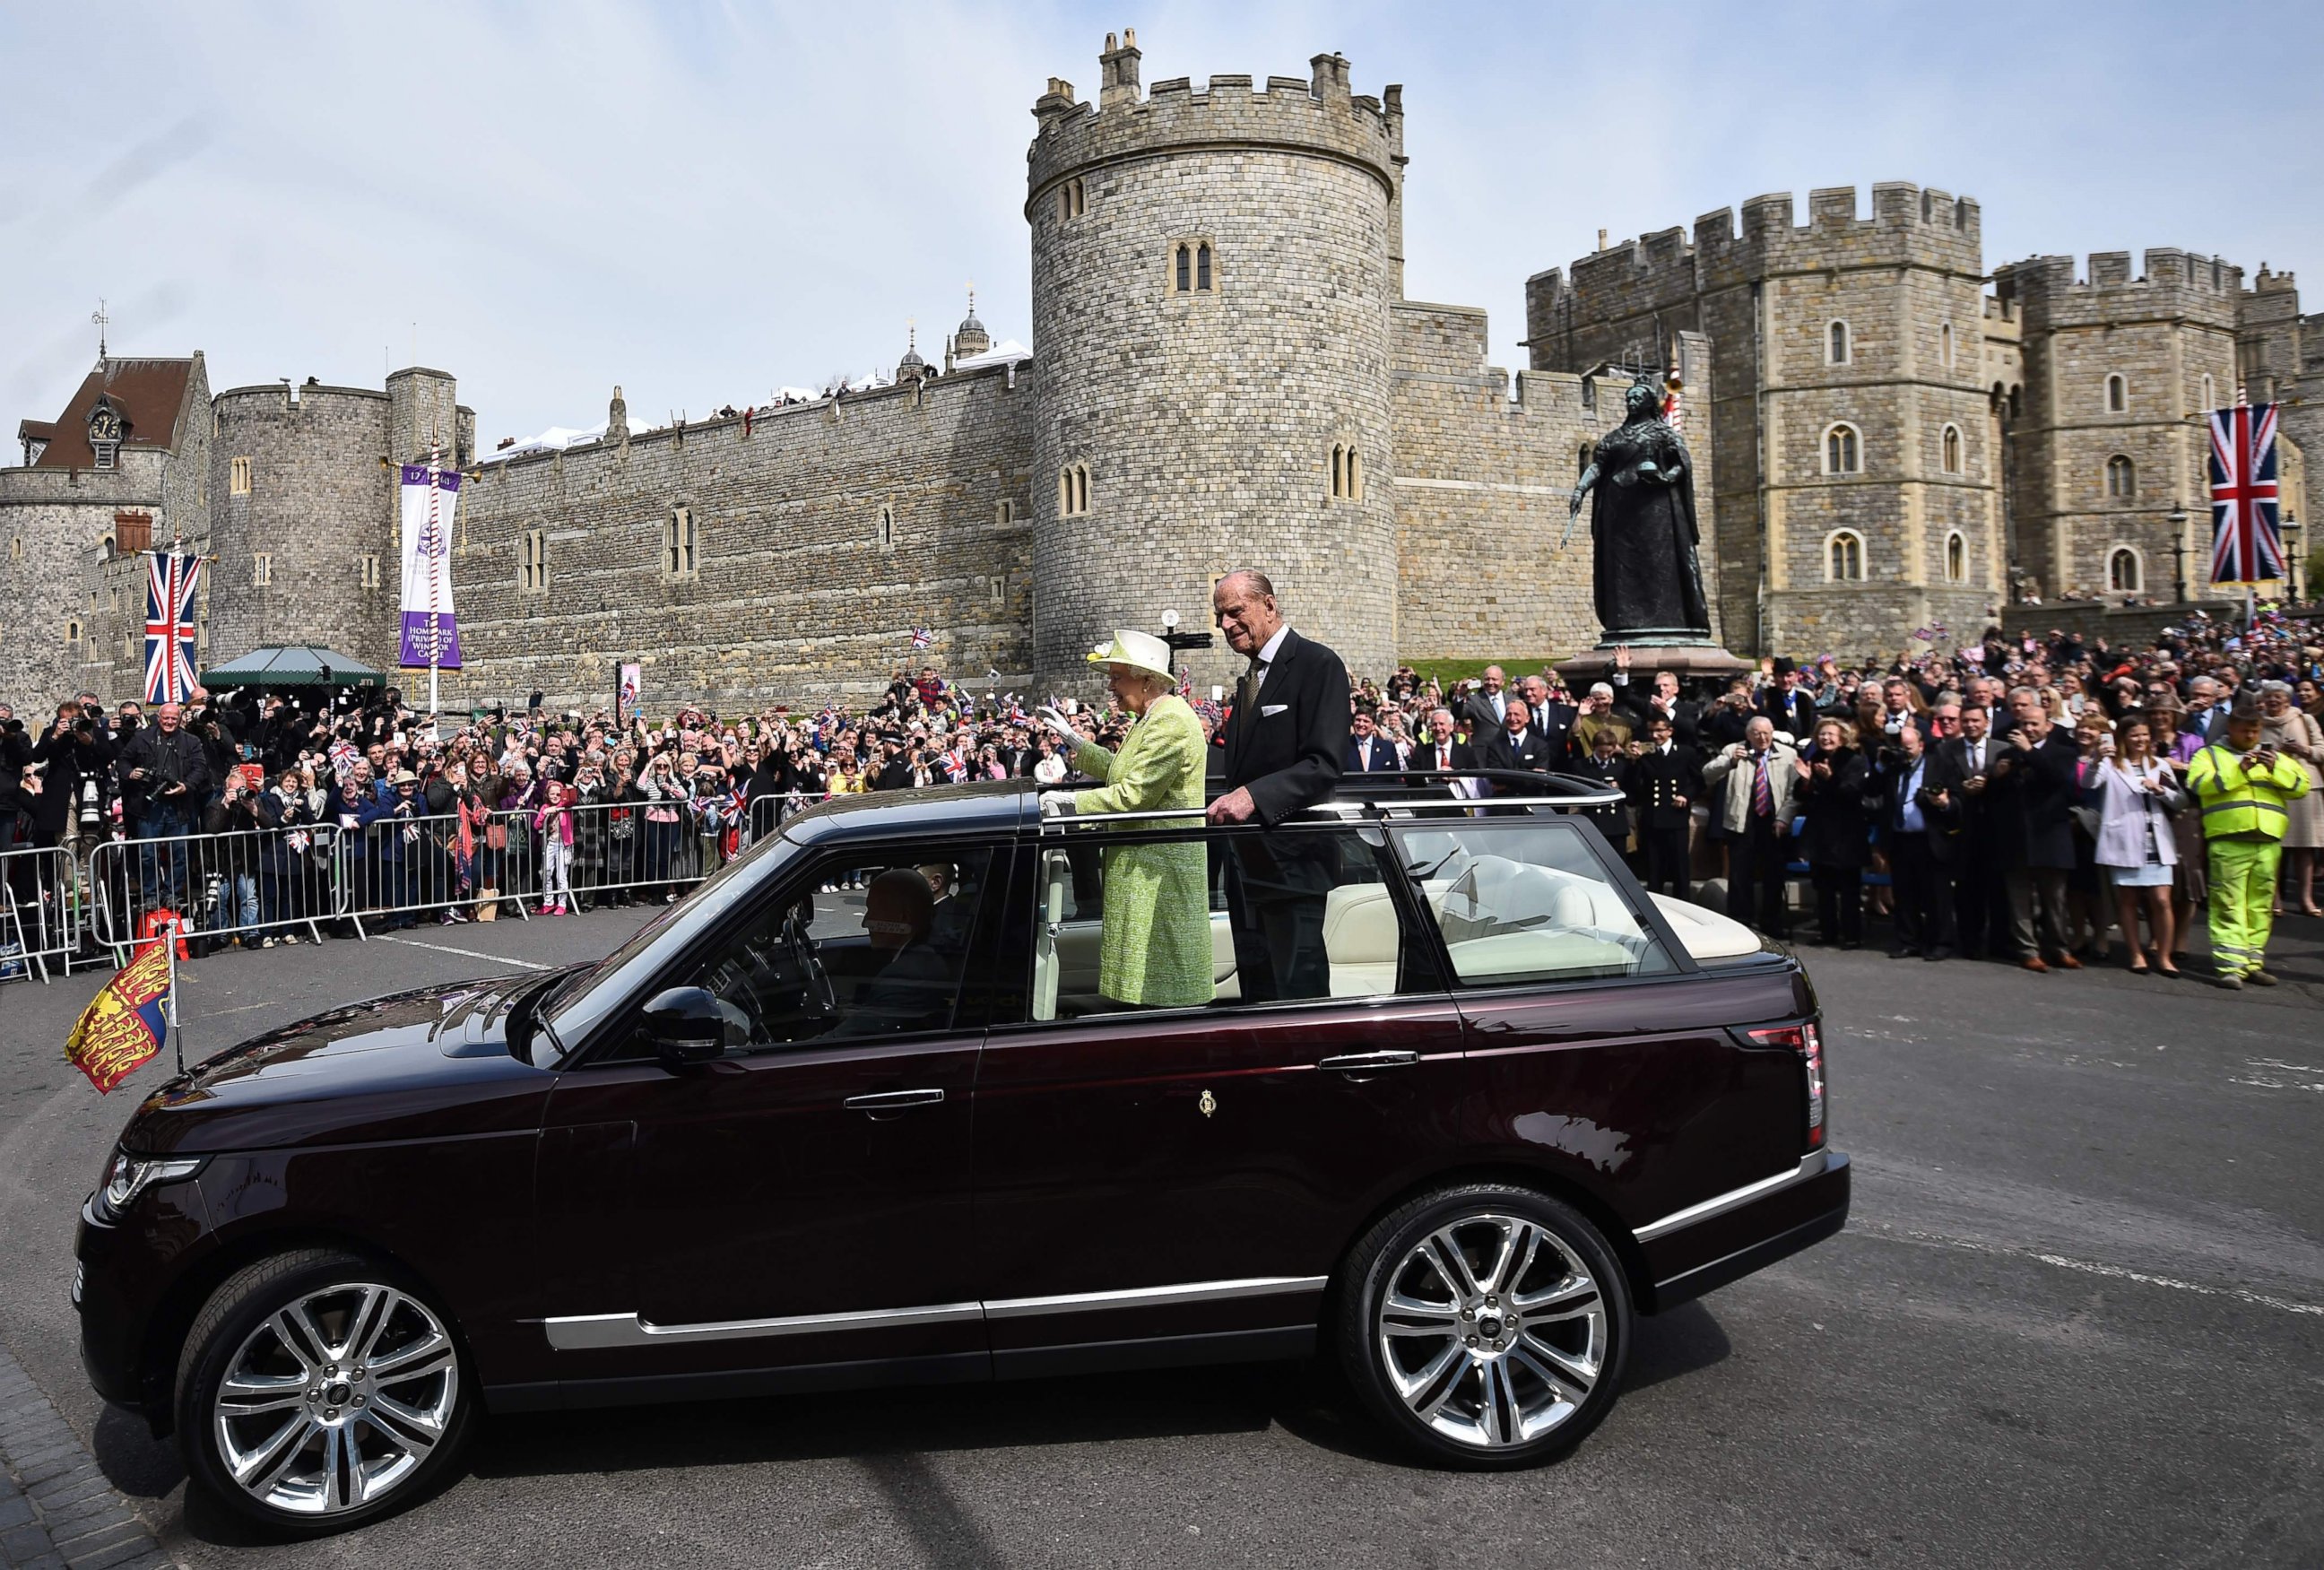 PHOTO: Britain's Queen Elizabeth II, accompanied by Prince Philip, Duke of Edinburgh, waves to  well-wishers during a walkabout on her 90th birthday in Windsor, Britain, April 21, 2016.